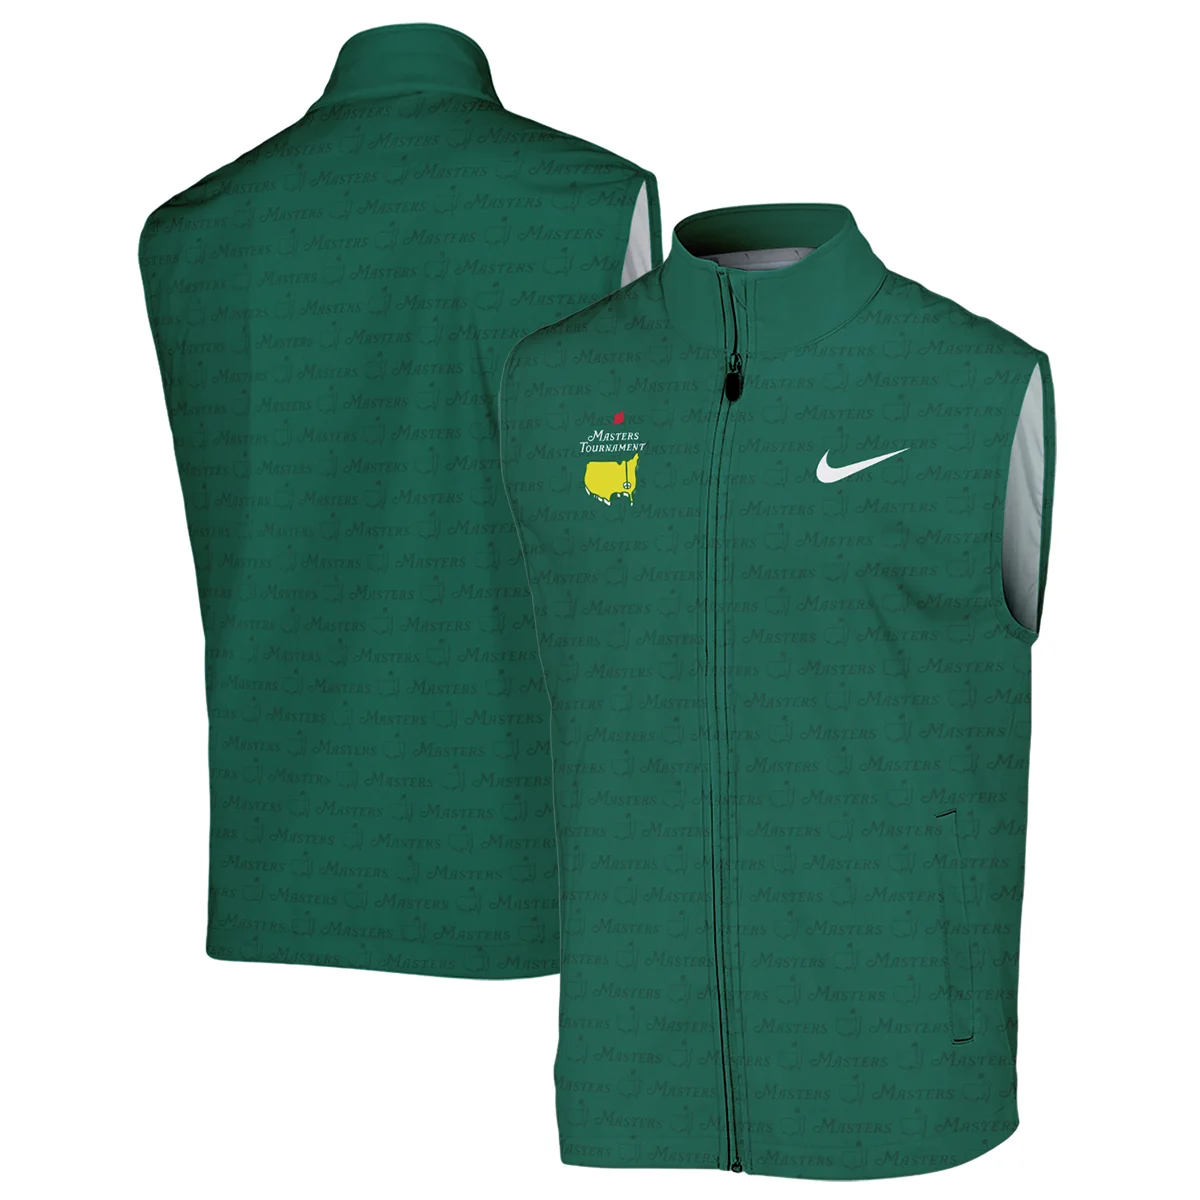 Golf Pattern Cup White Mix Green Masters Tournament Nike Bomber Jacket Style Classic Bomber Jacket